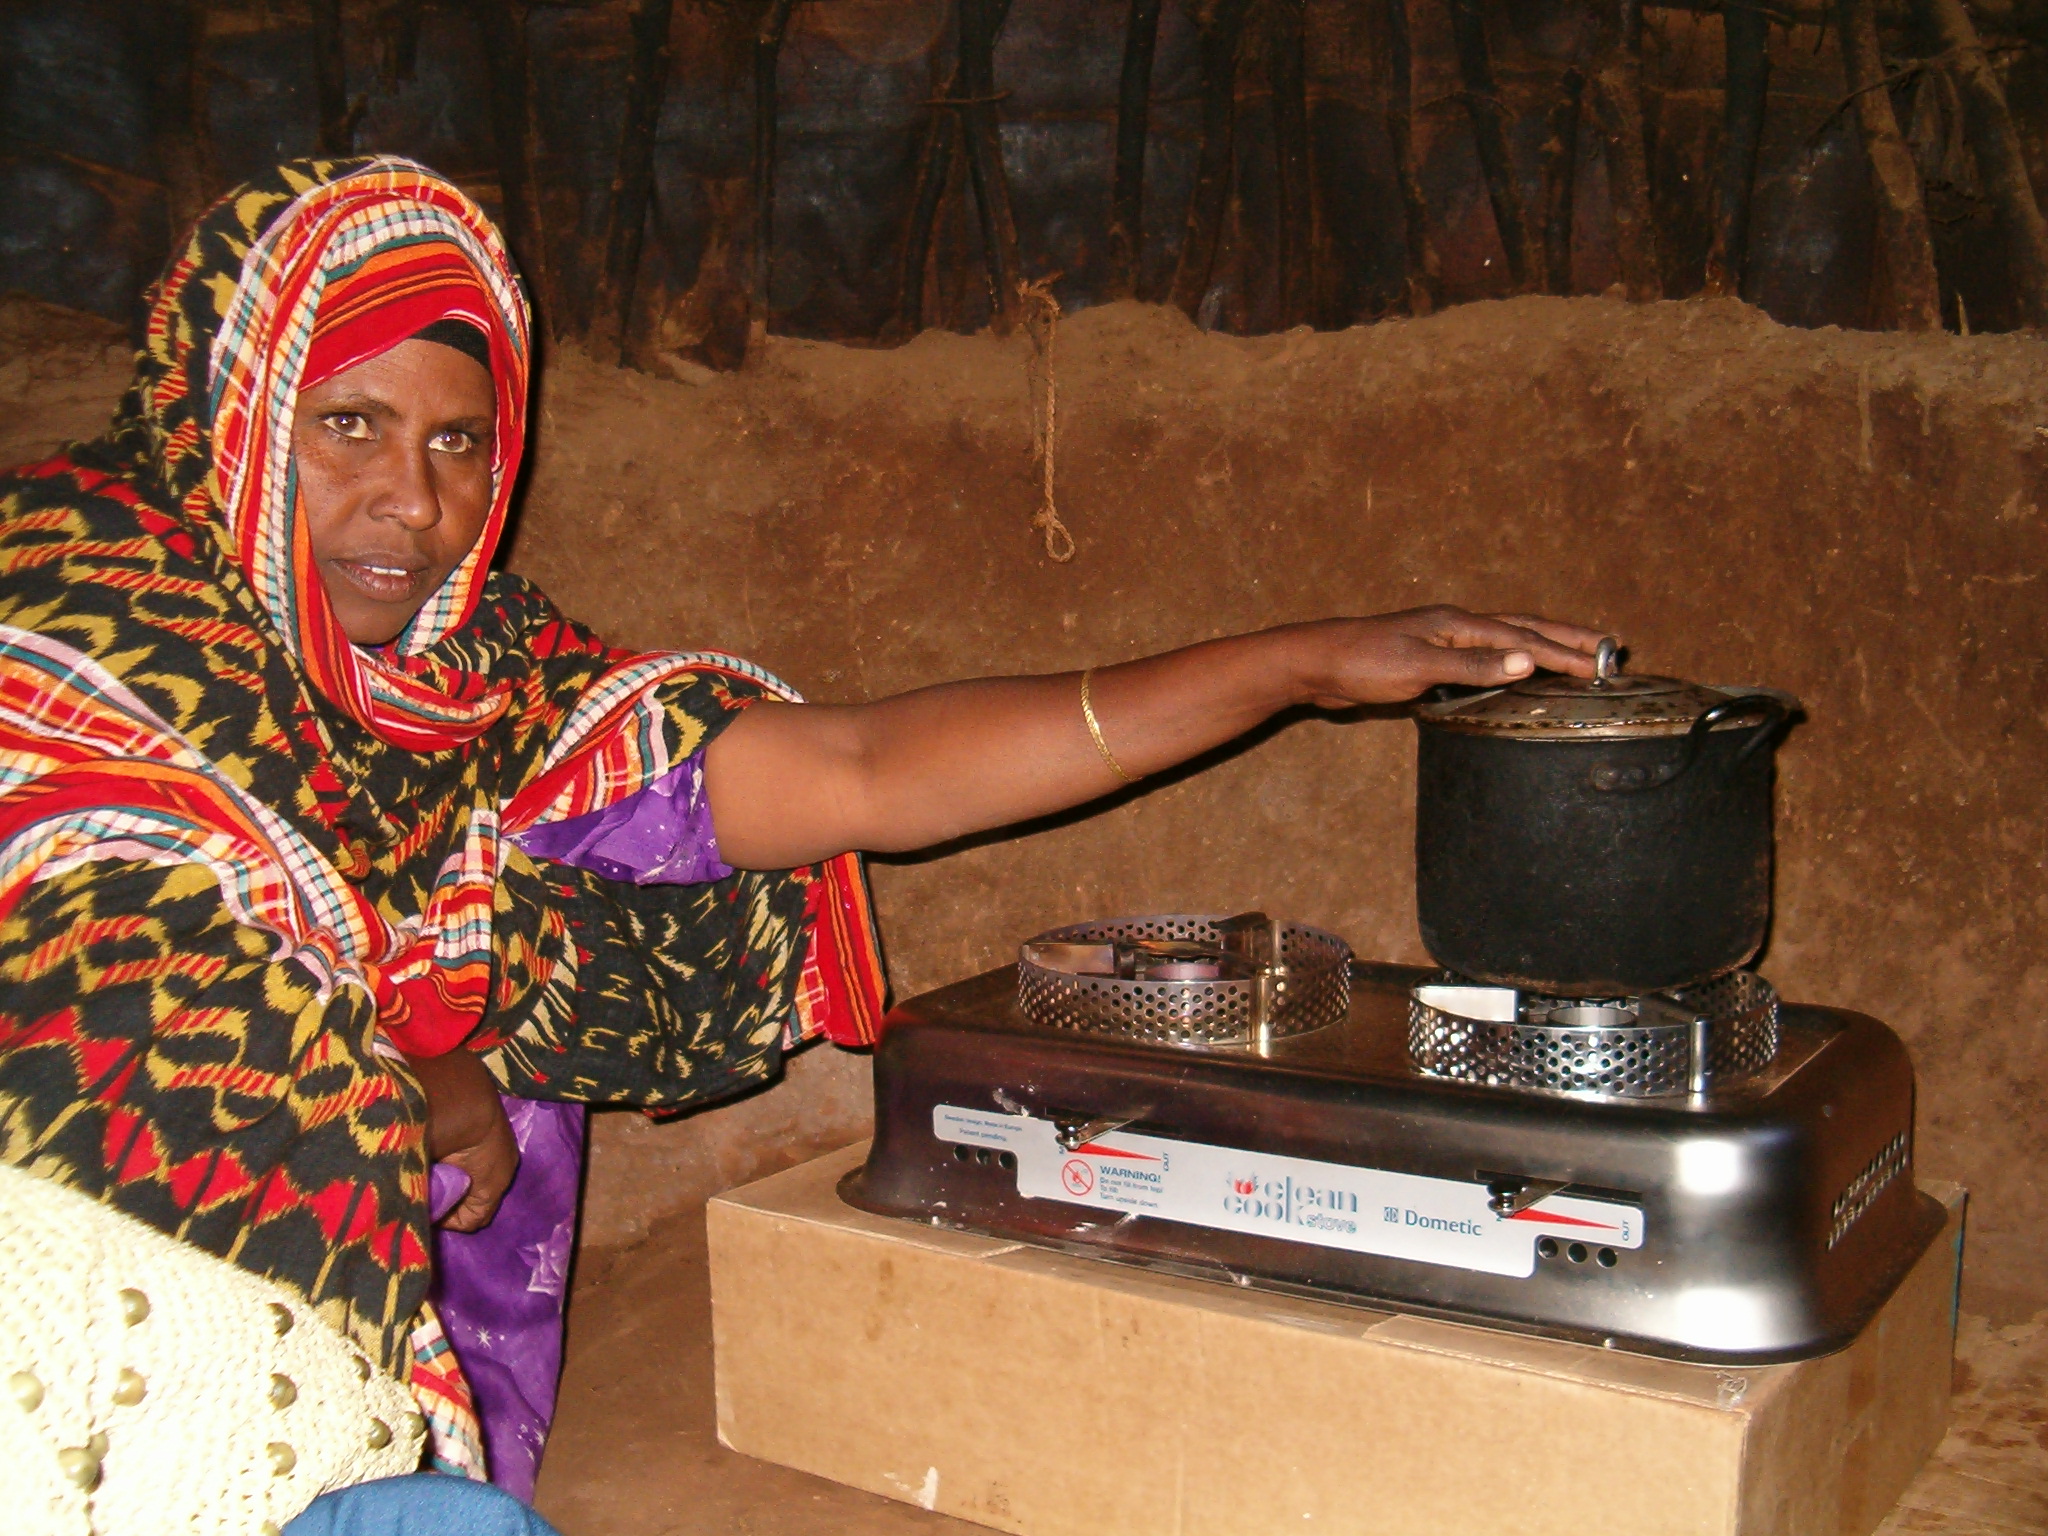 Woman and cookstove. Project Gaia / Flickr